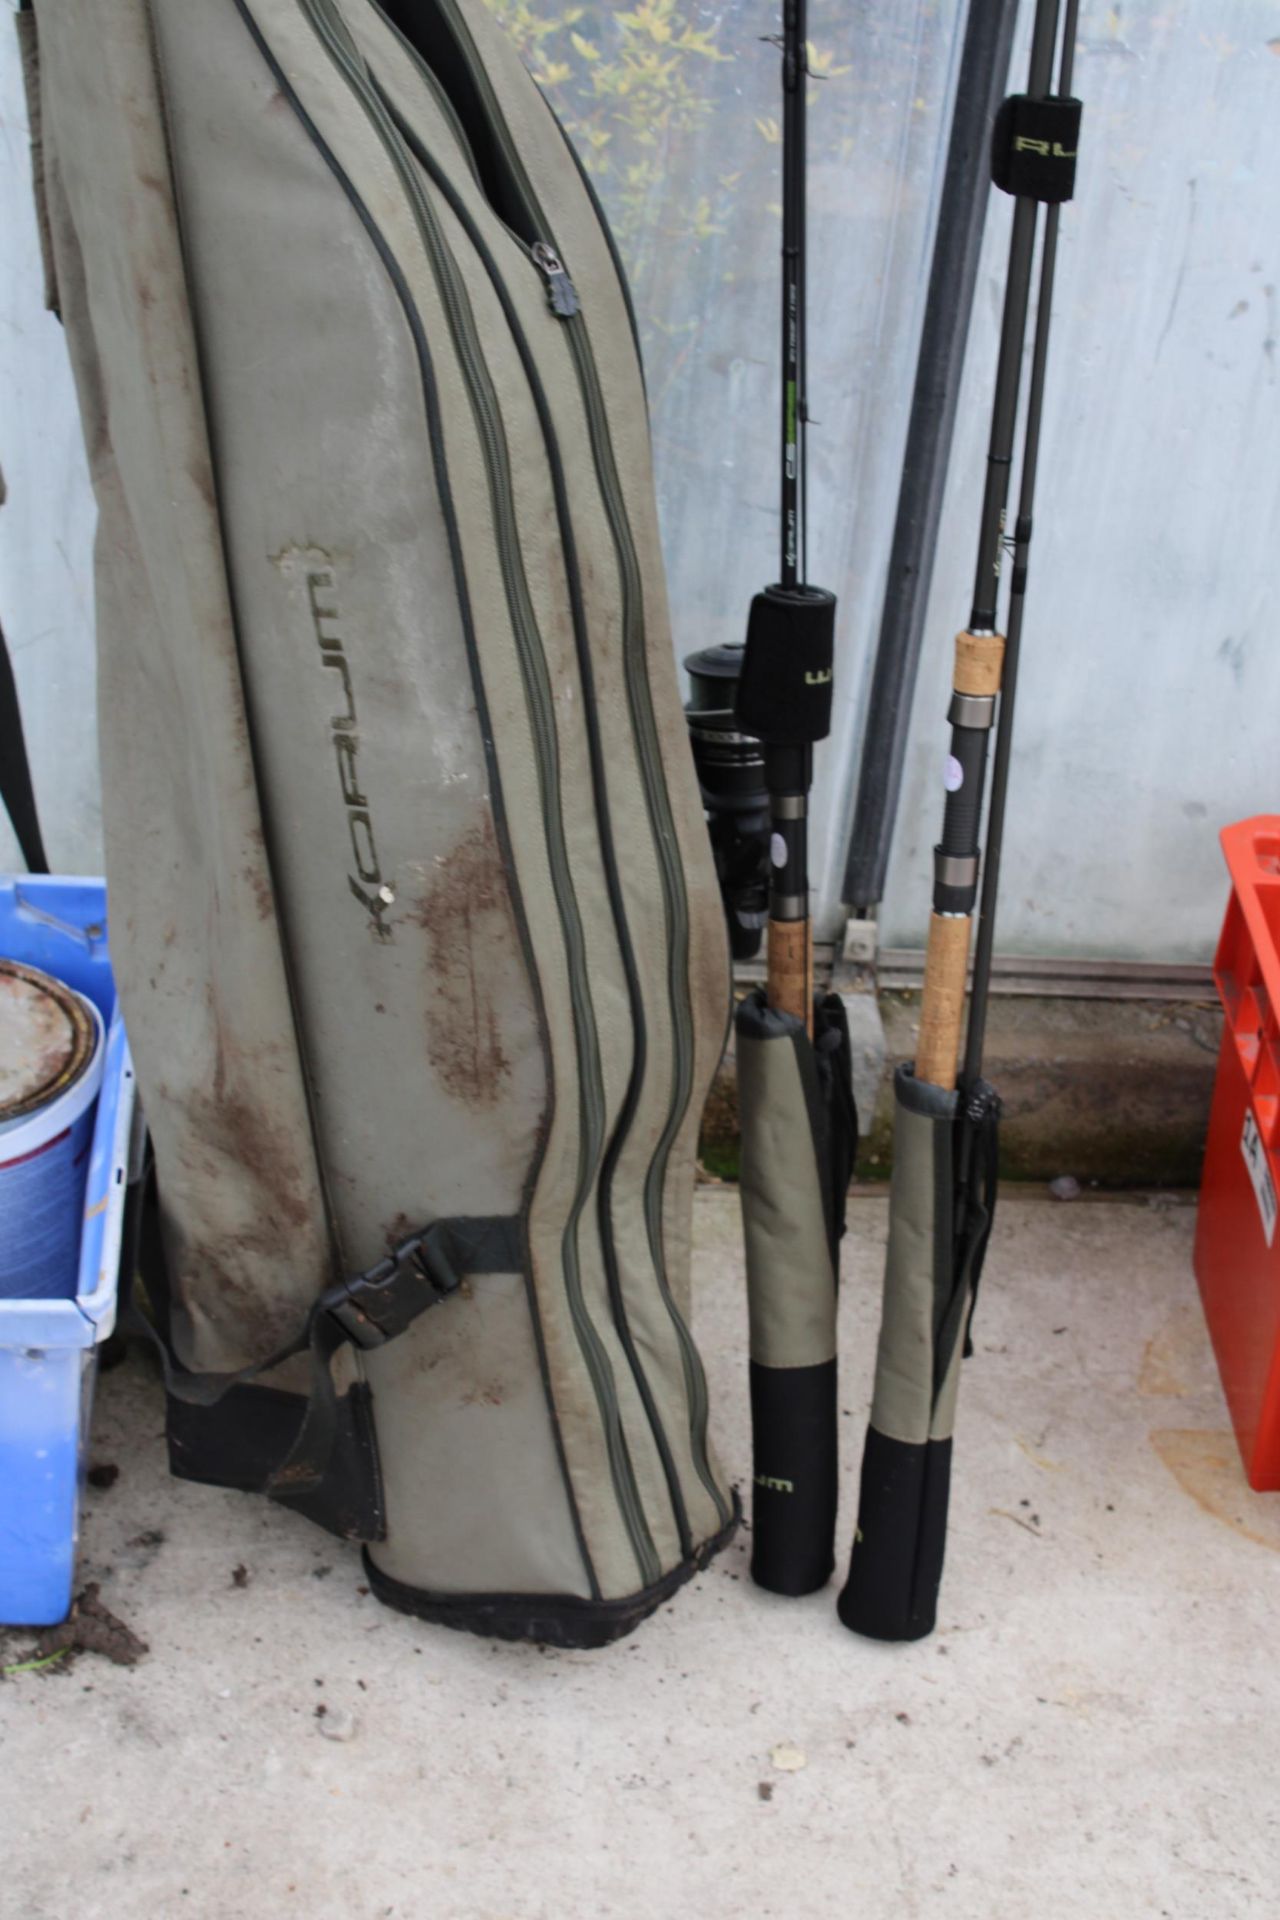 A ROD CARRYING BAG AND TWO VARIOUS FISHING RODS - Image 2 of 6